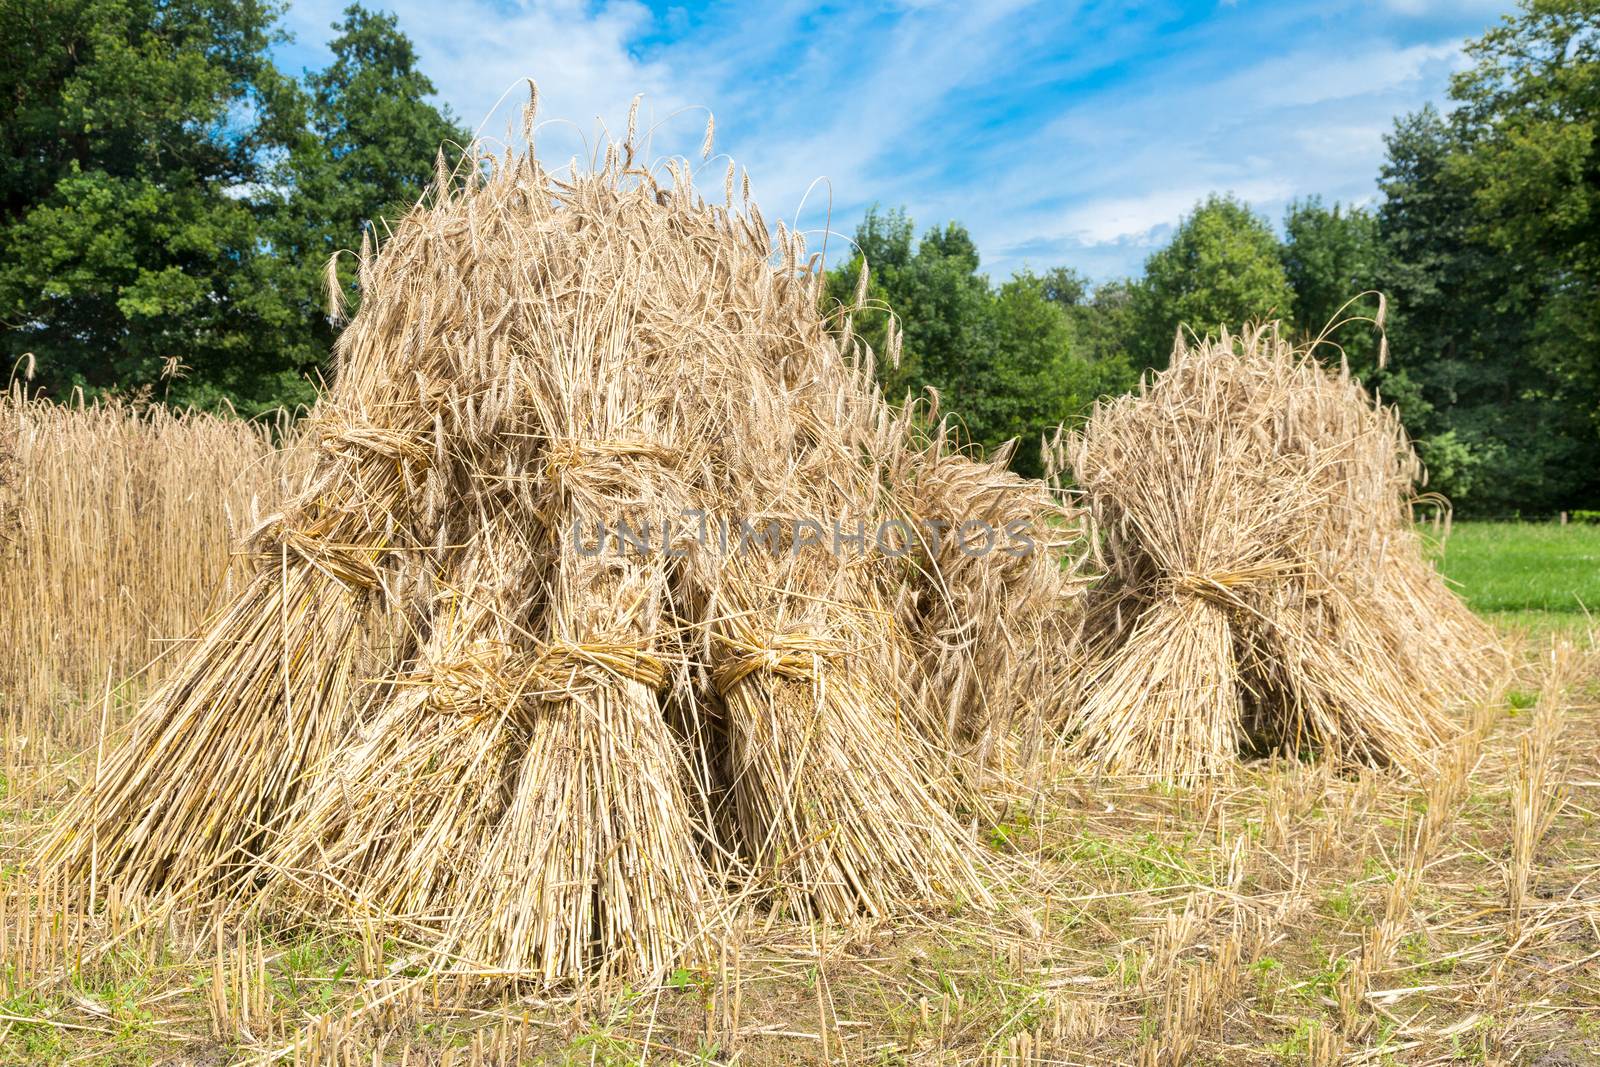 Sheaves of rye standing at corn field with blue sky and green trees